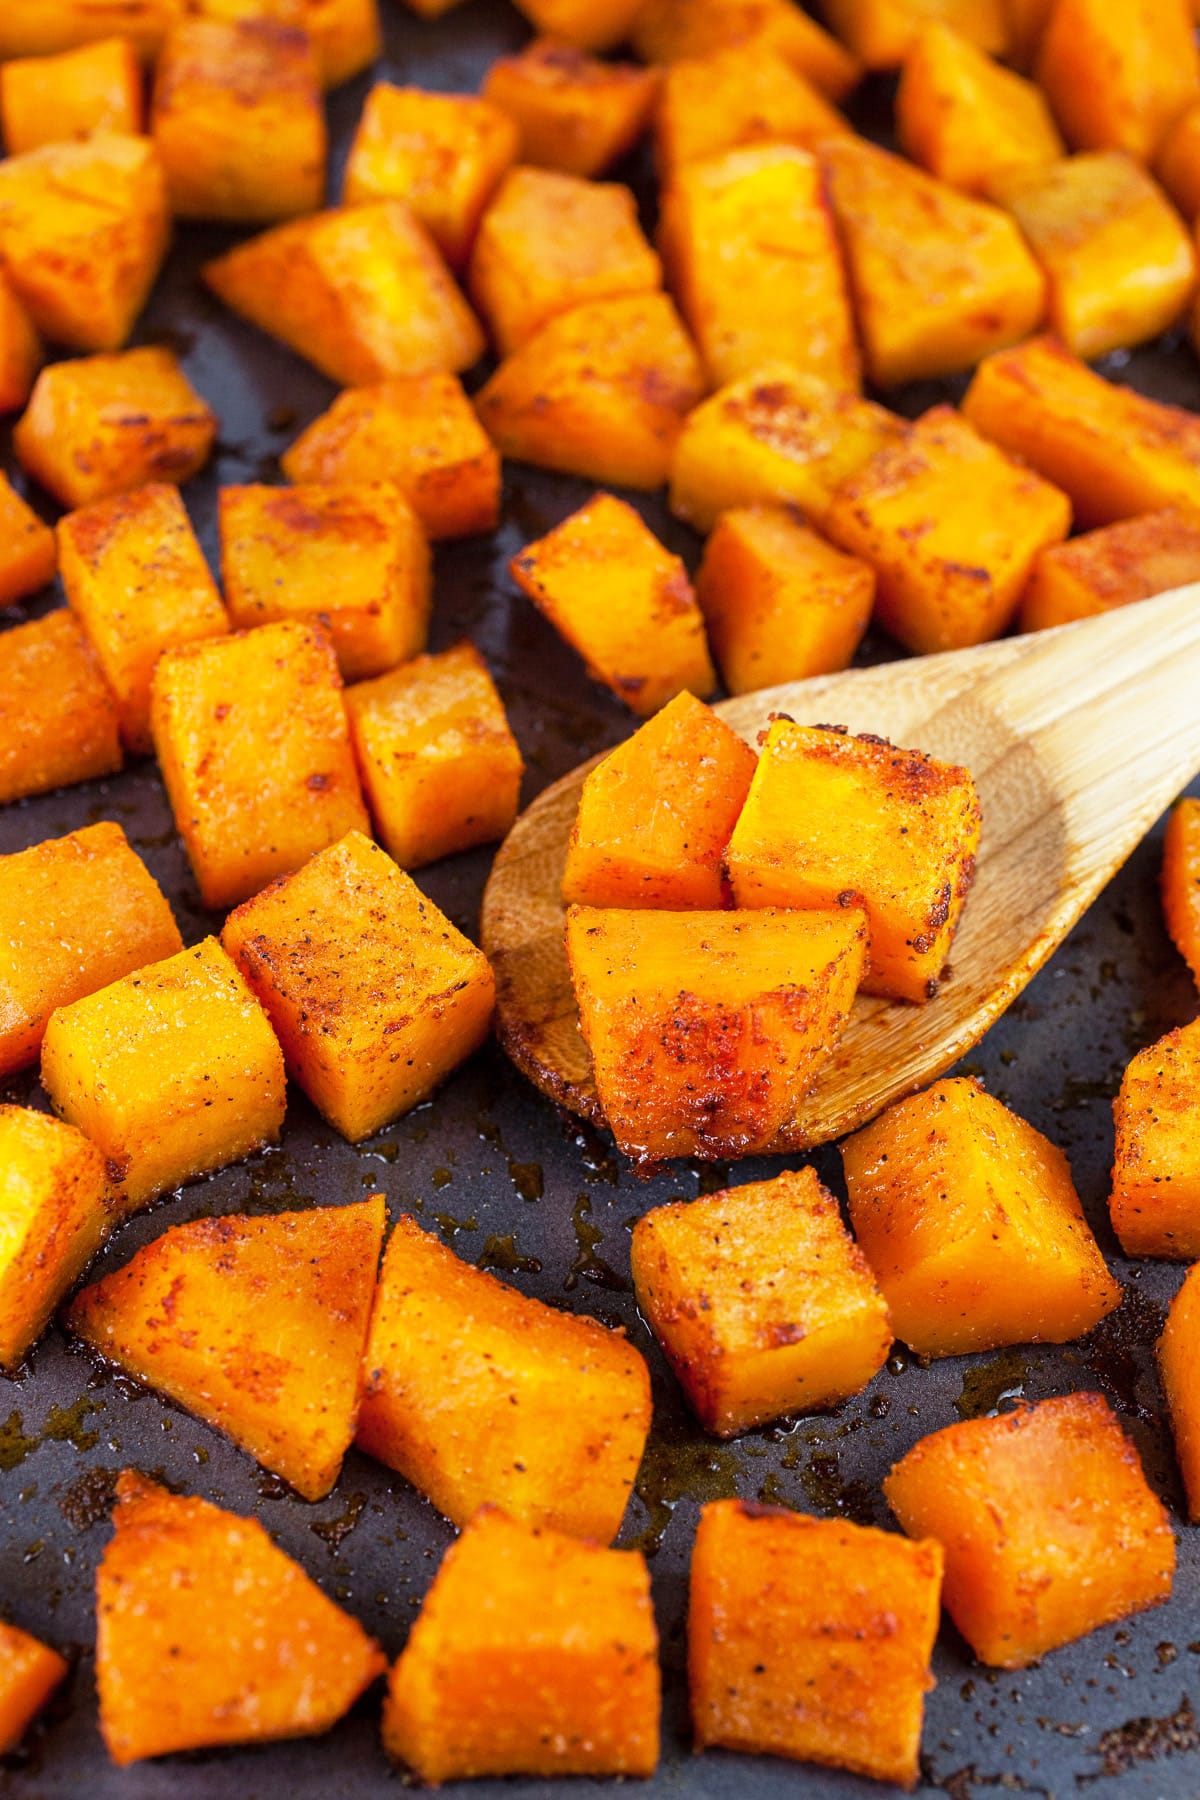 Roasted spiced butternut squash cubes on baking sheet with wooden spoon.